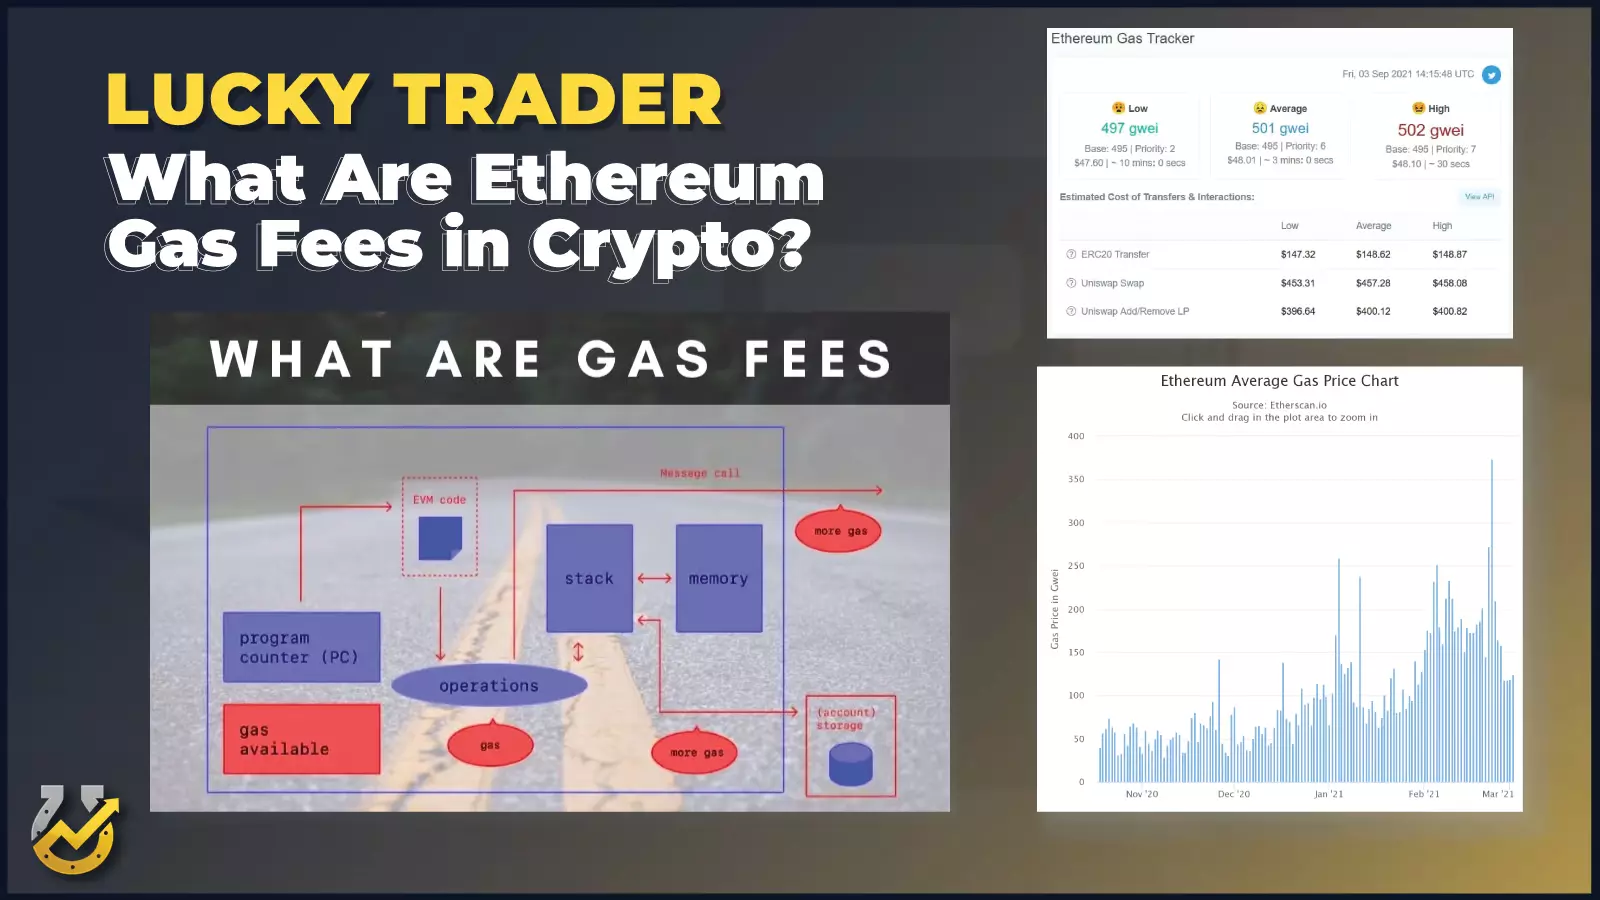 What Are Ethereum (ETH) Gas Fees in Crypto?